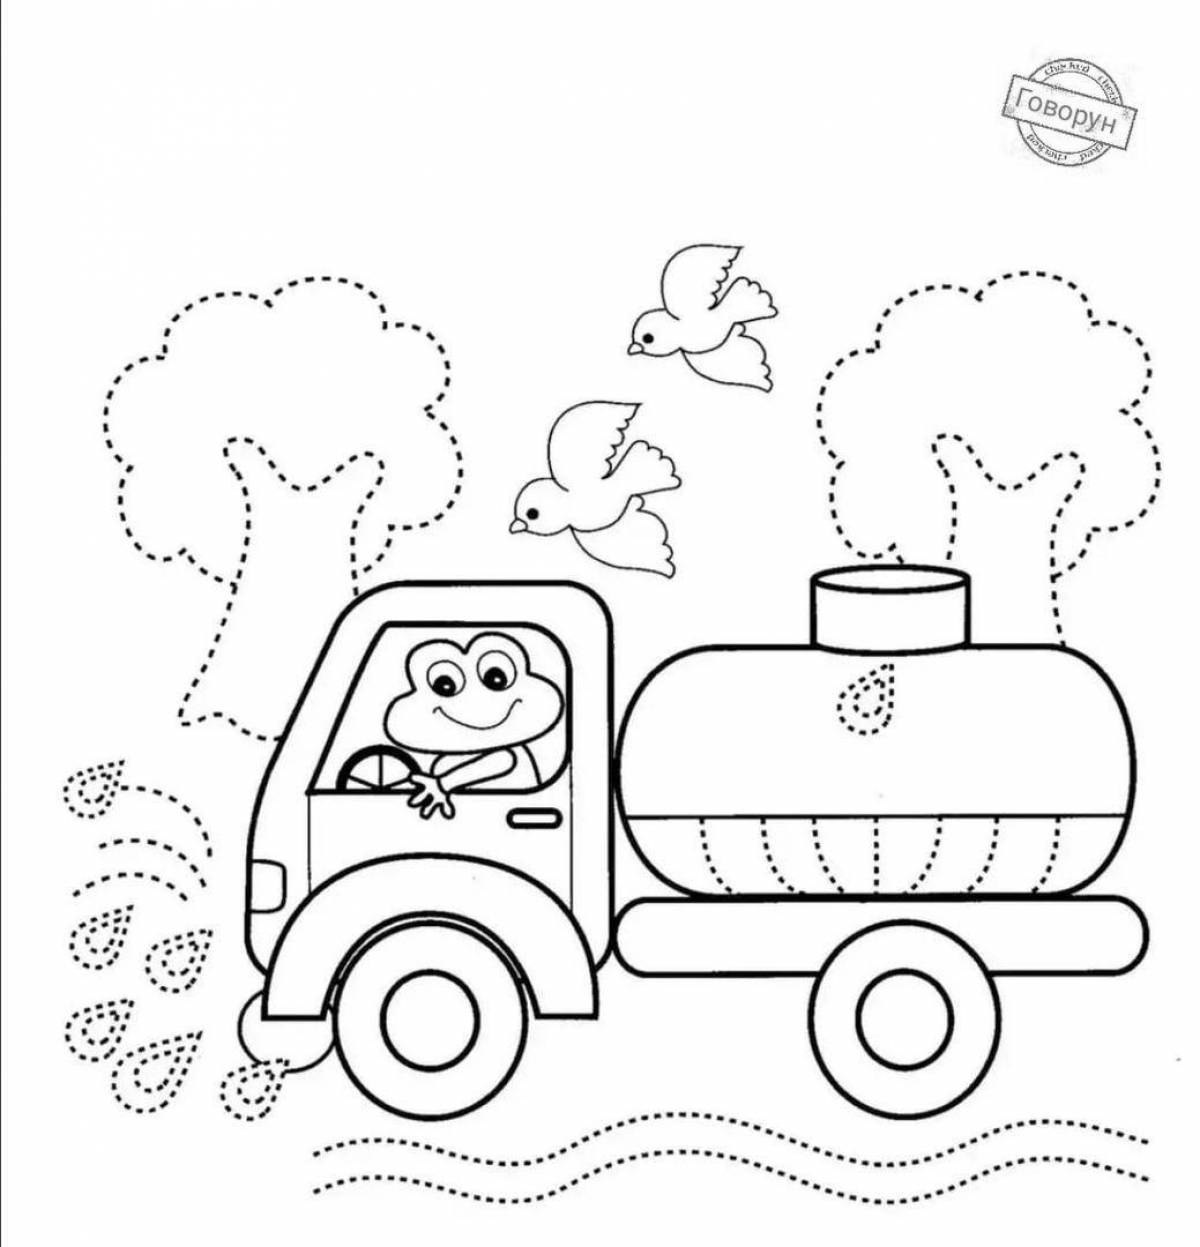 Colorful water truck coloring page for kids